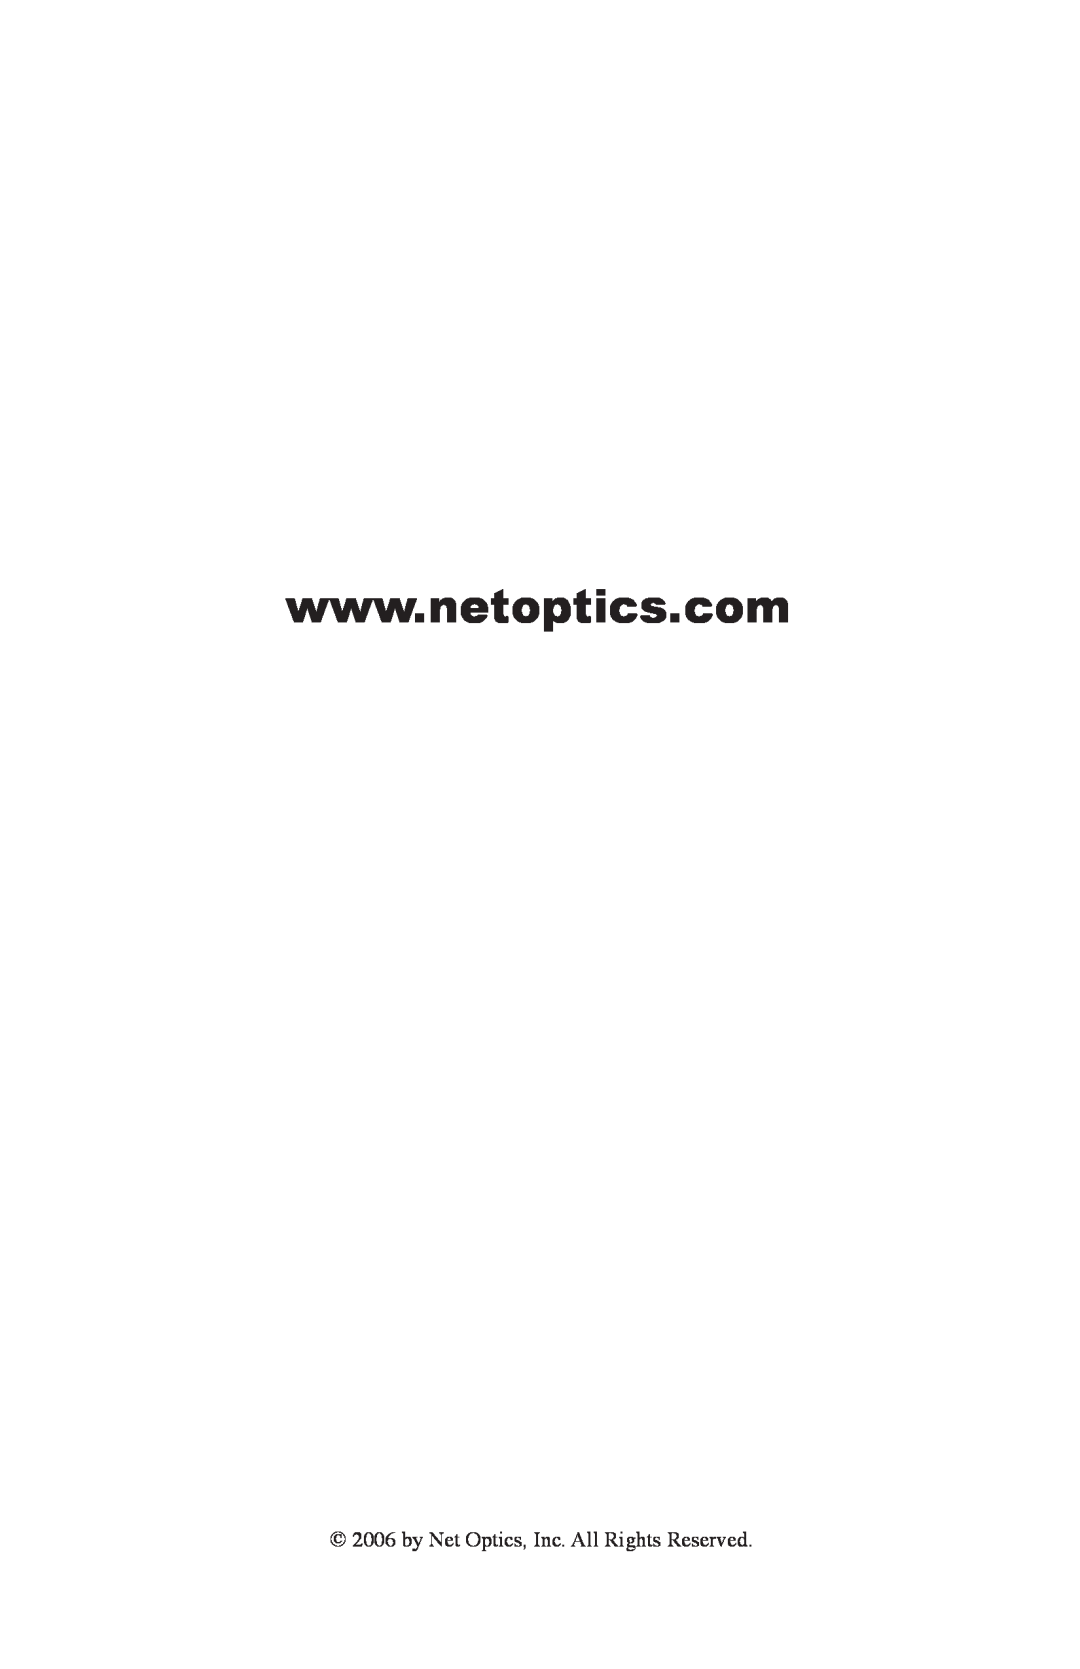 Net Optics 96542iTP, 96547iTP manual by Net Optics, Inc. All Rights Reserved 